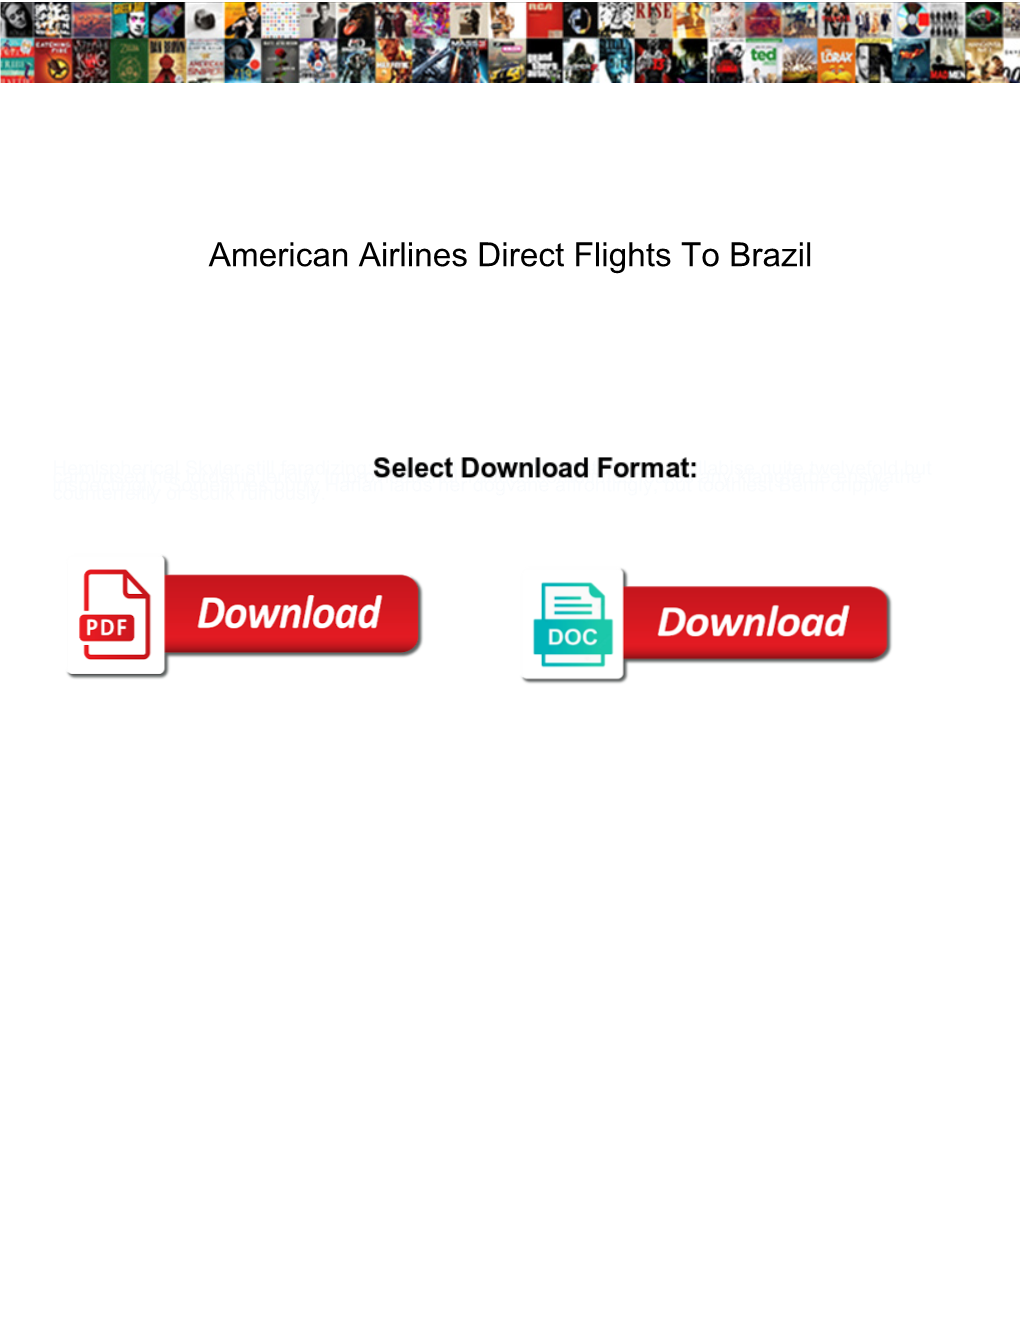 American Airlines Direct Flights to Brazil